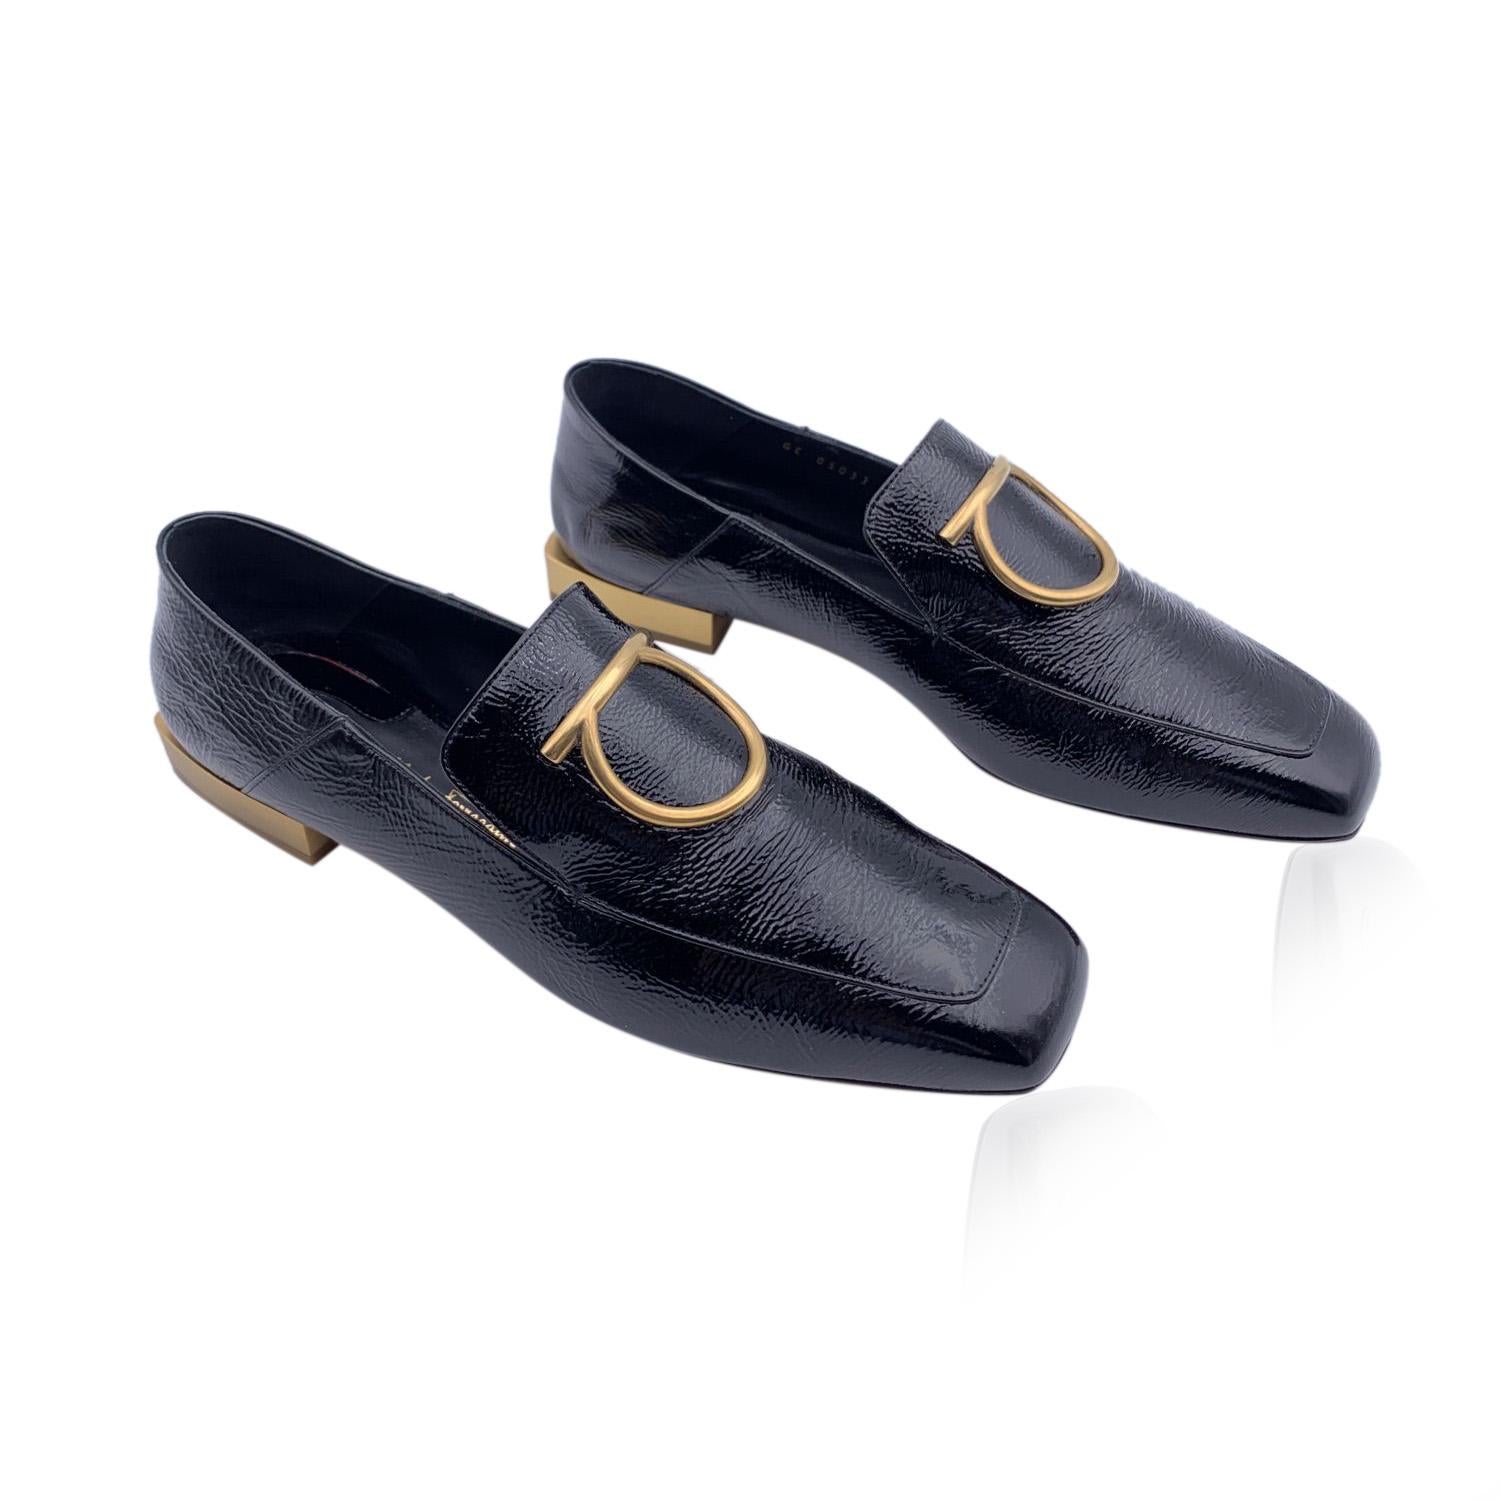 Beautiful Salvatore Ferragamo 'Lana' Moccassins Loafers Shoes. Crafted in black patent leather They feature a big gold metal Gancino detailing, a square toe and slip-on design. Leather sole with gold metal block heels. Heels height: 1cm. Made in